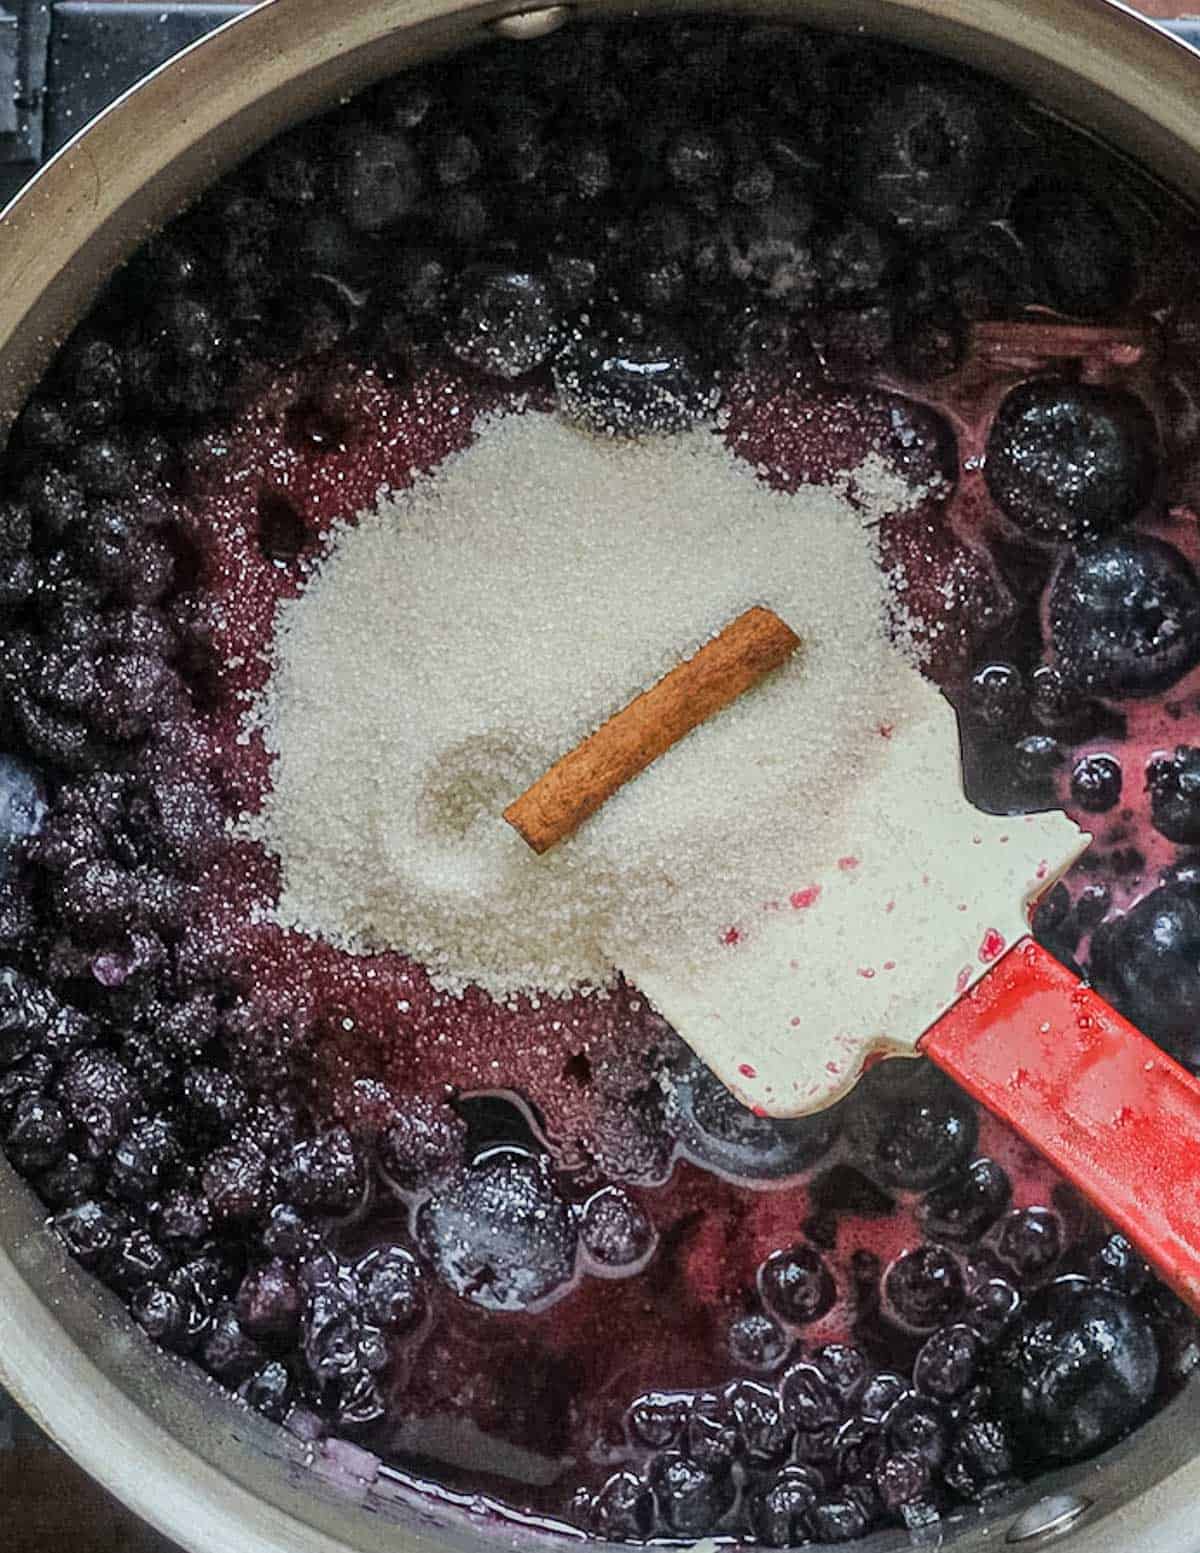 Adding a cinnamon stick to a pan of blueberries cooking.